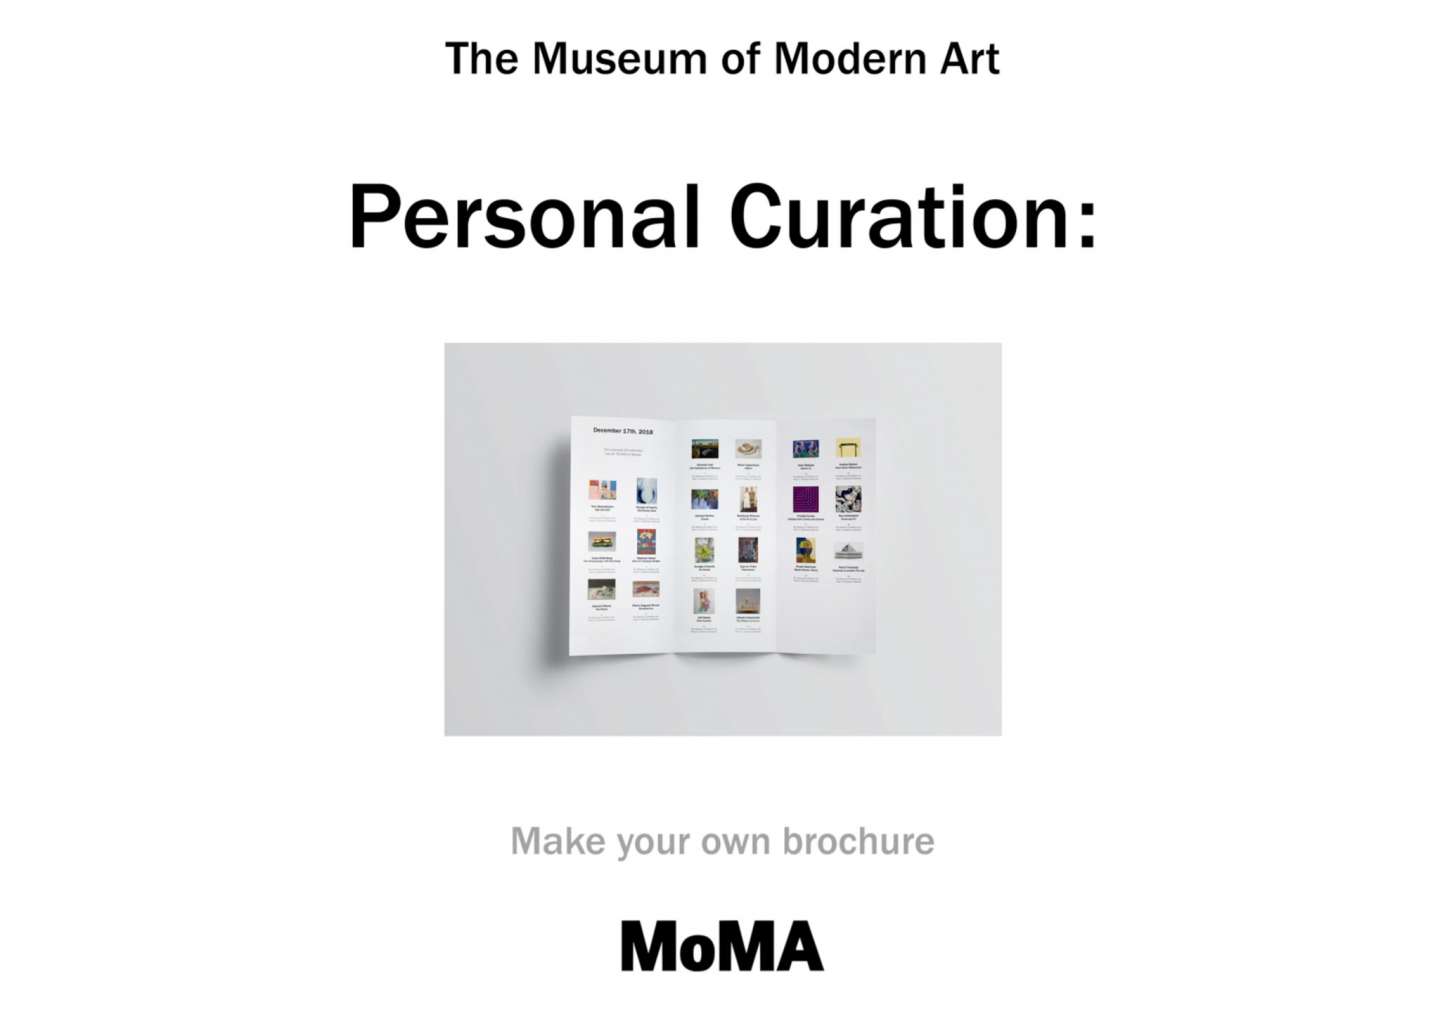 Personal Curation for MoMa